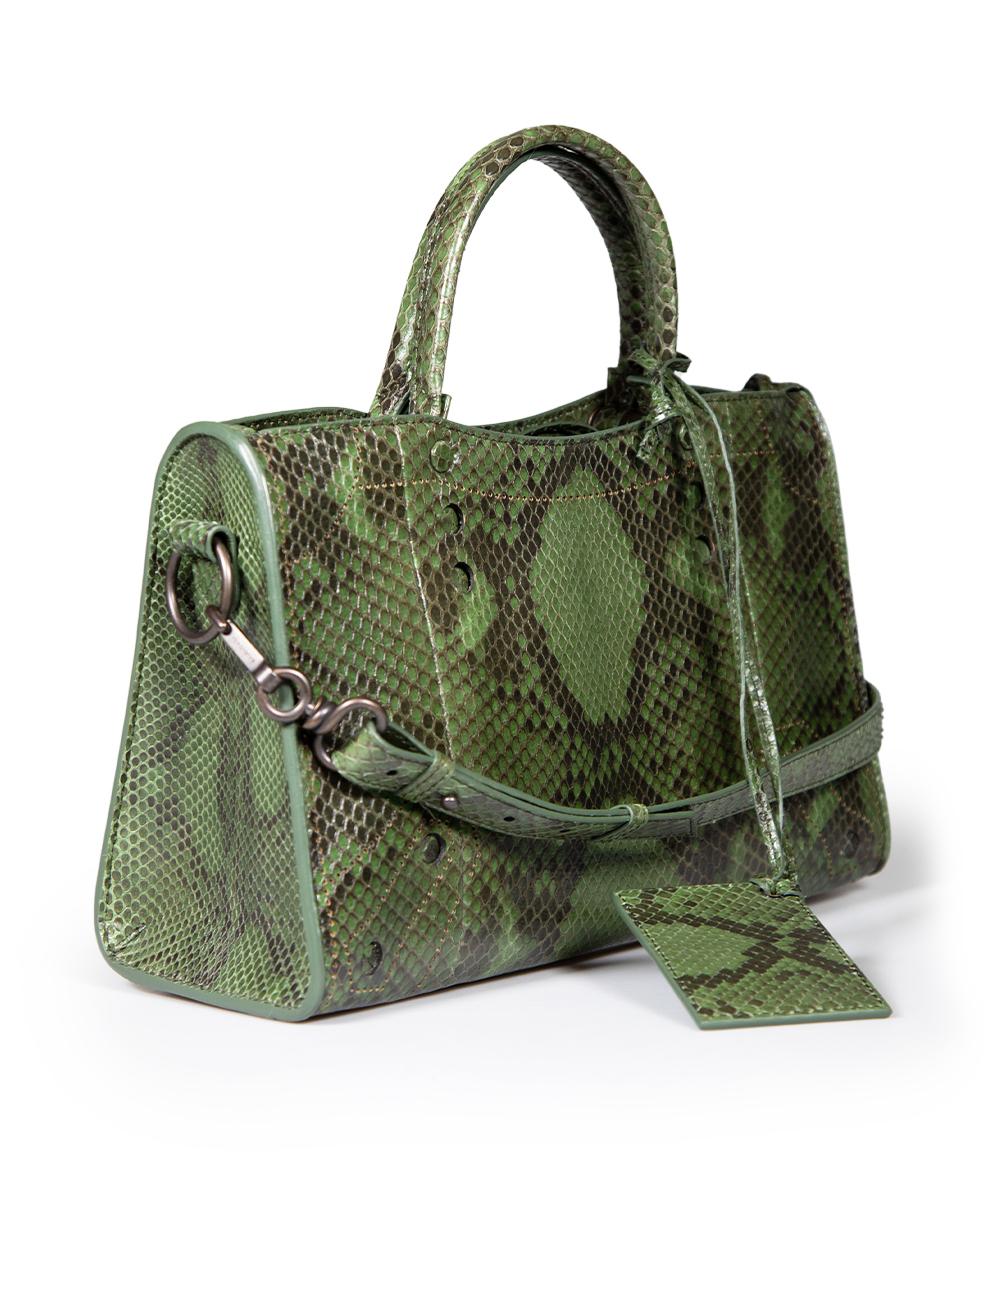 CONDITION is Very good. Minimal wear to bag is evident. Minimal wear to hardware with minor tarnishing on this used Balenciaga designer resale item.
 
 
 
 Details
 
 
 Model: City
 
 Green
 
 Snakeskin
 
 Medium handbag
 
 2x Rolled top handles
 
